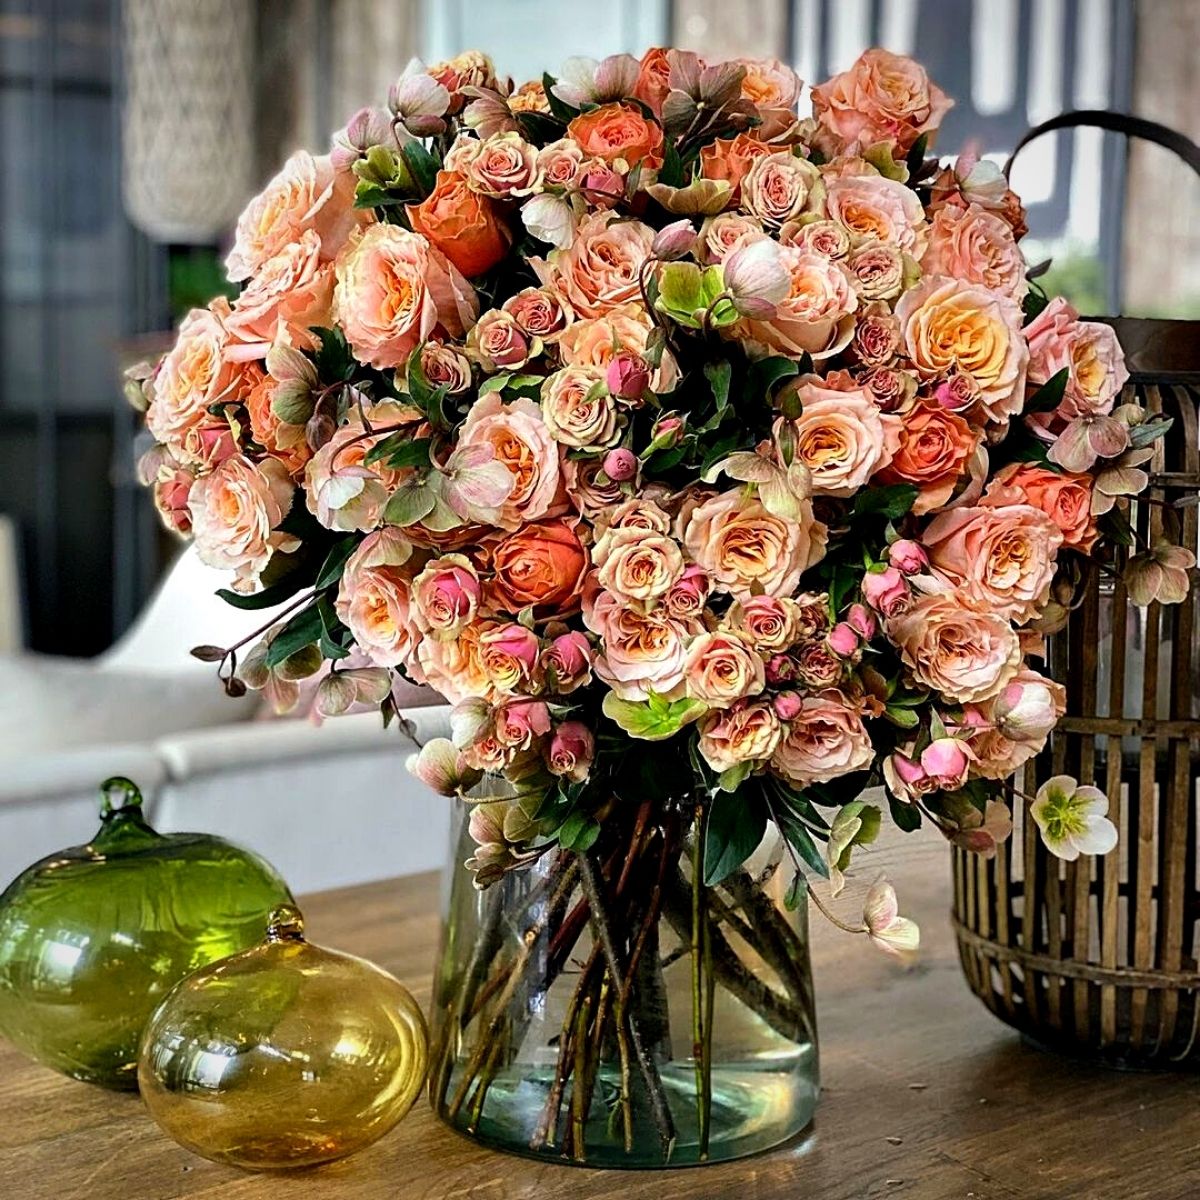 Interplant Roses' Trick to Prolonging the Vase Life of Spray Roses